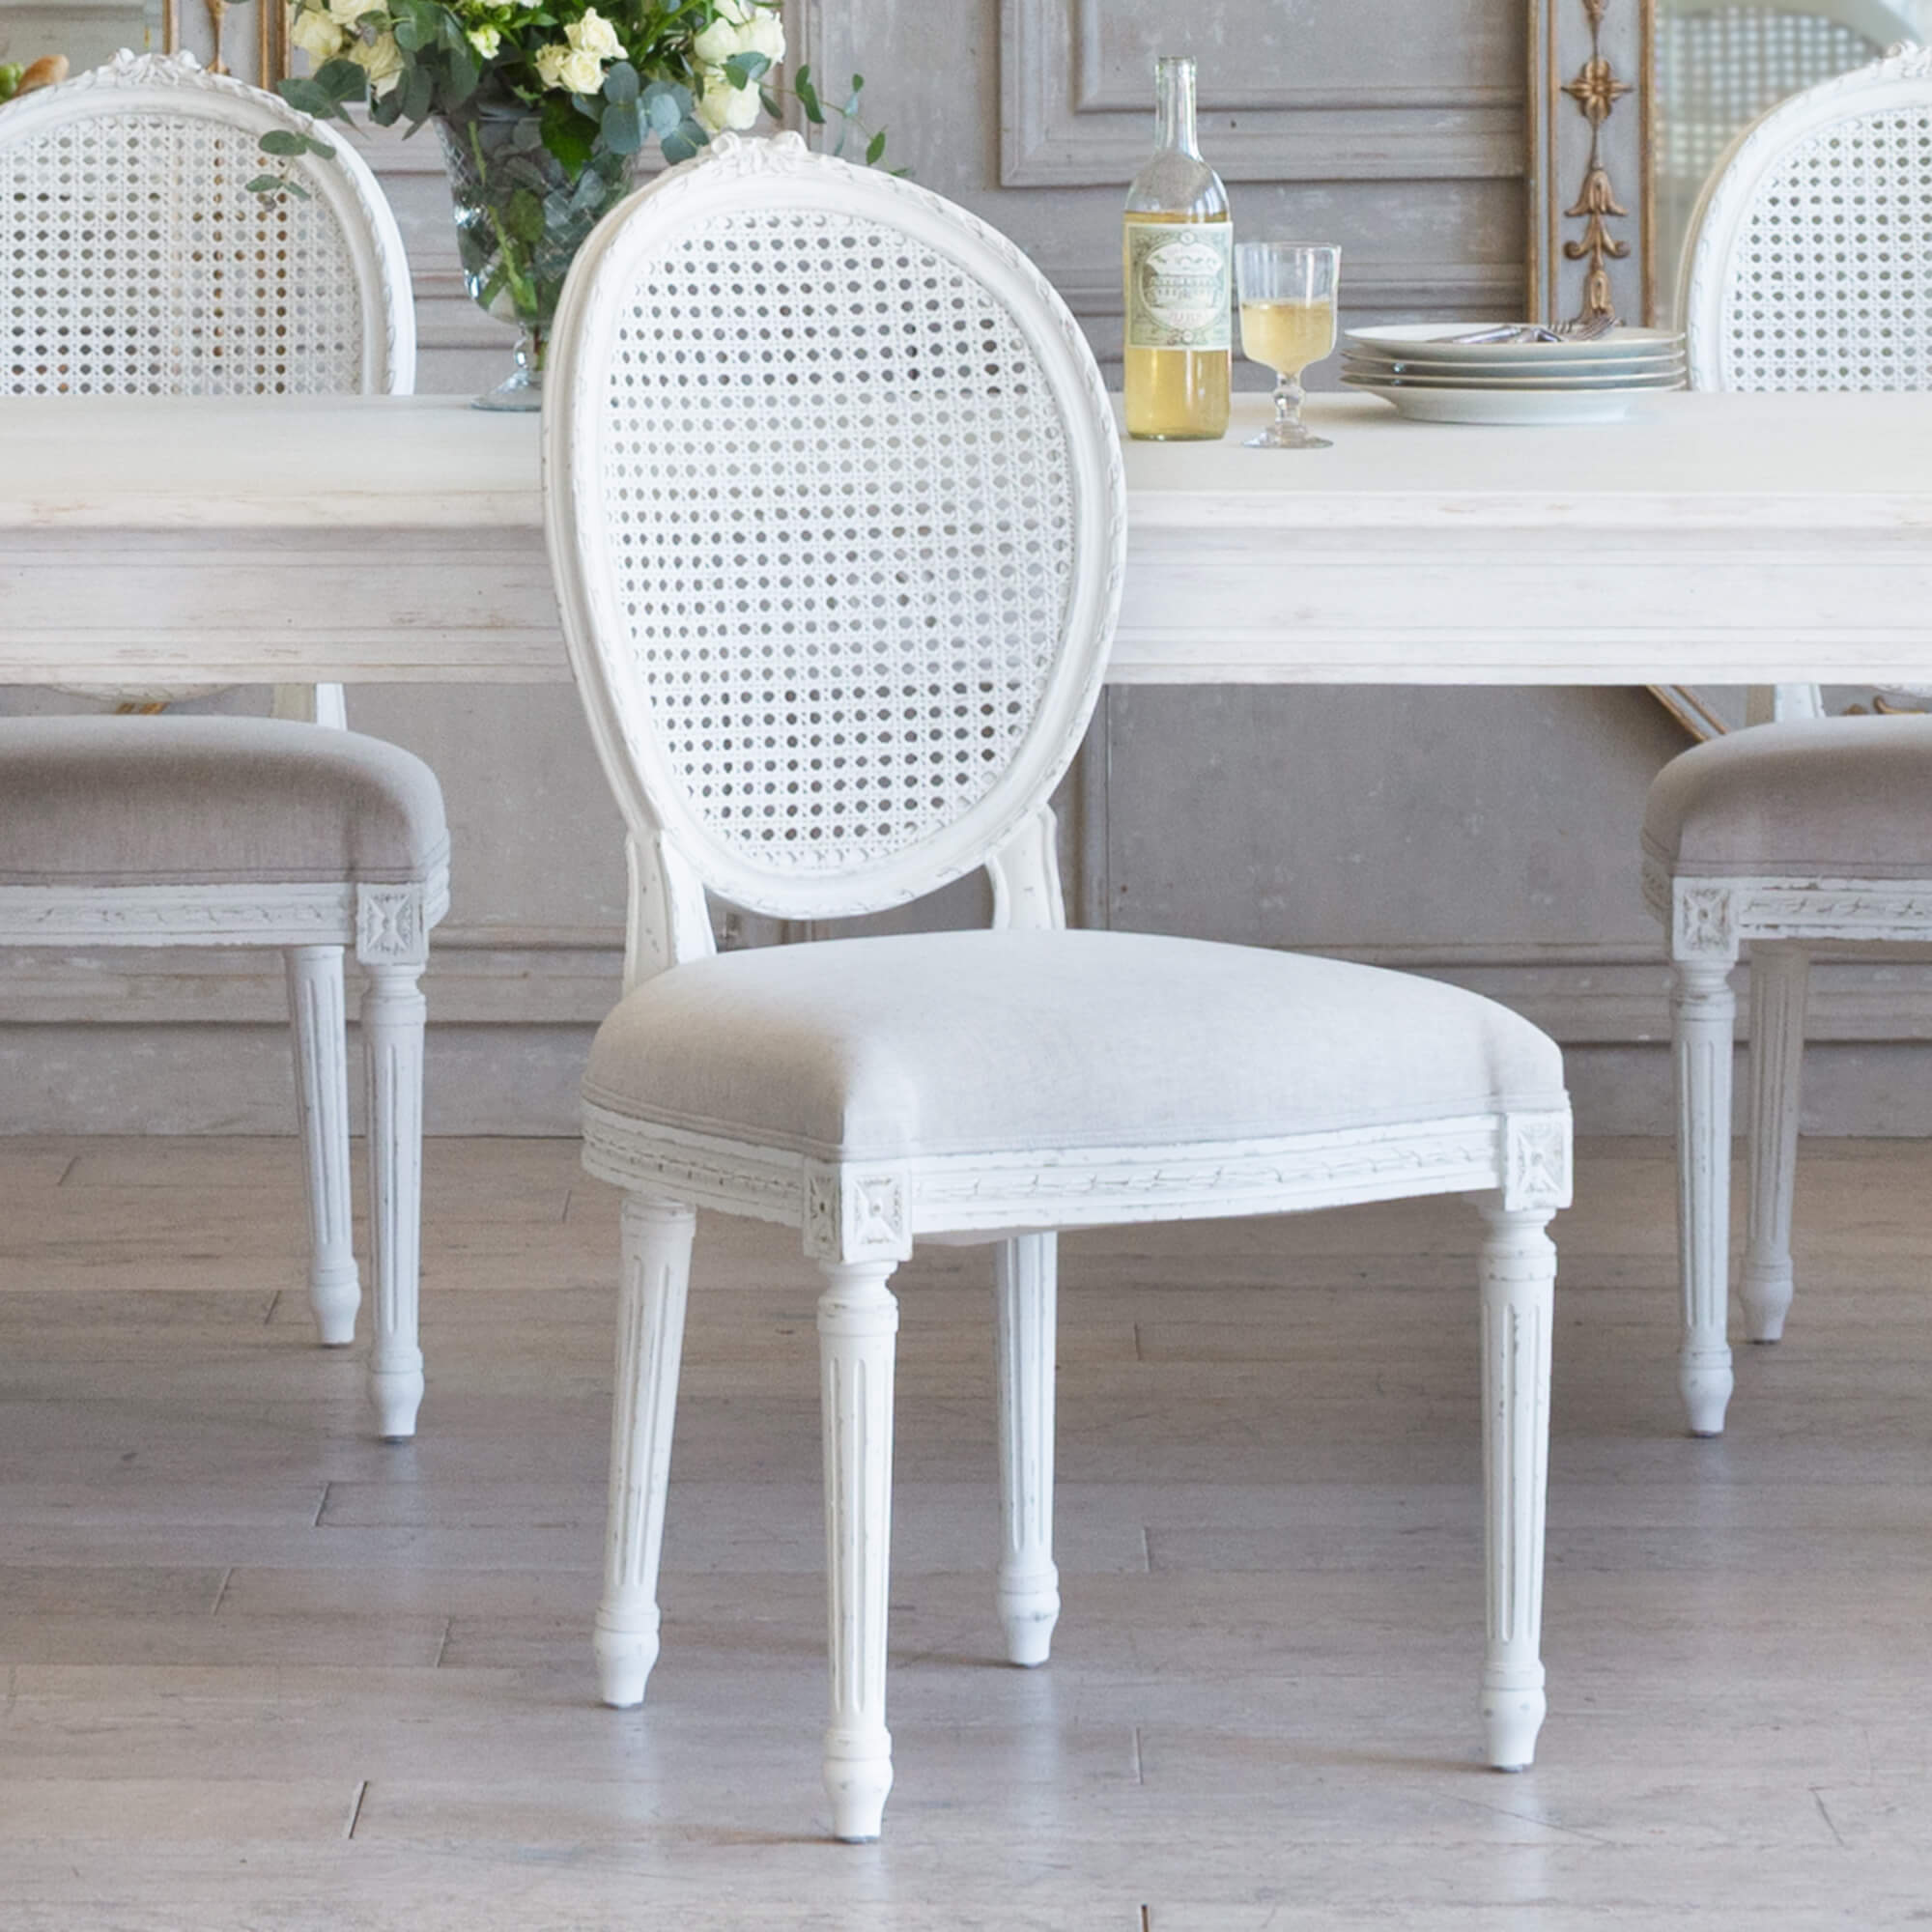 Eloquence® Louis Cane Dining Chair in Fog Linen and Antique White Finish